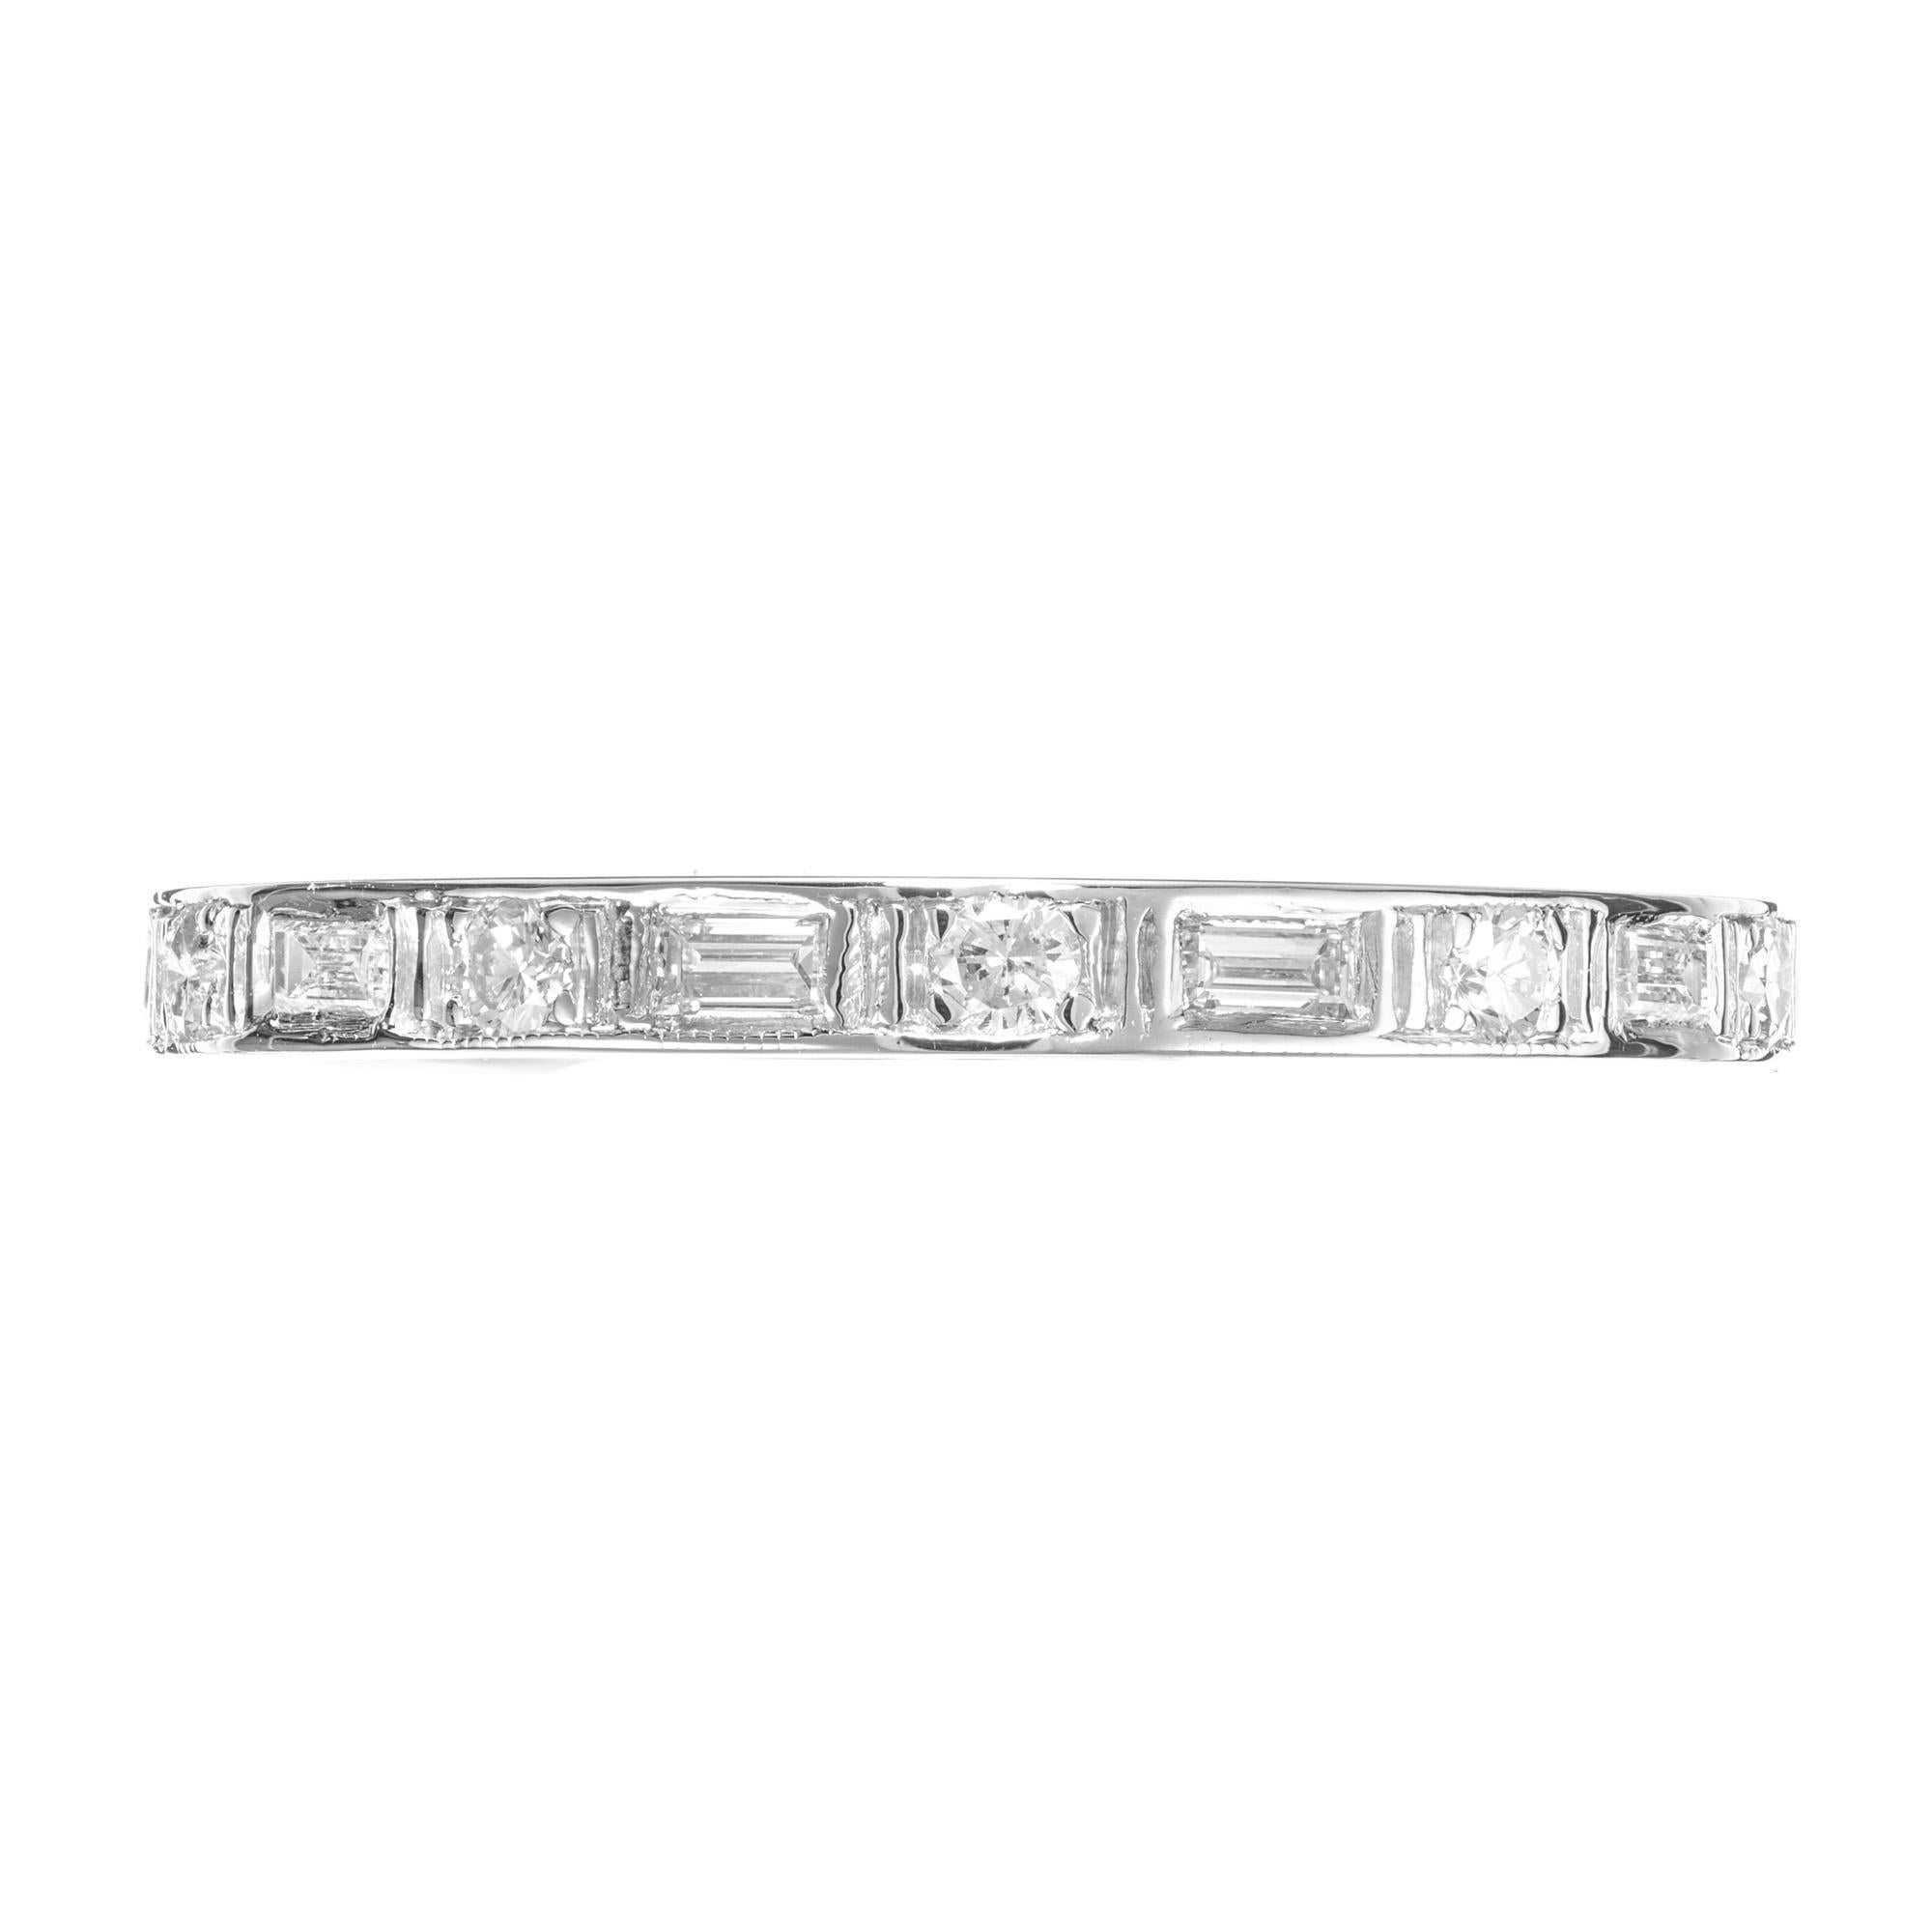 1950's Diamond eternity wedding band ring. 10 round diamonds with 10 straight cut baguette diamonds, set in a platinum eternity setting.  

10 round diamonds, H-I SI approx. .20cts
10 straight cut baguettes, H-I VSI approx. .50cts
Size 8.5 and not